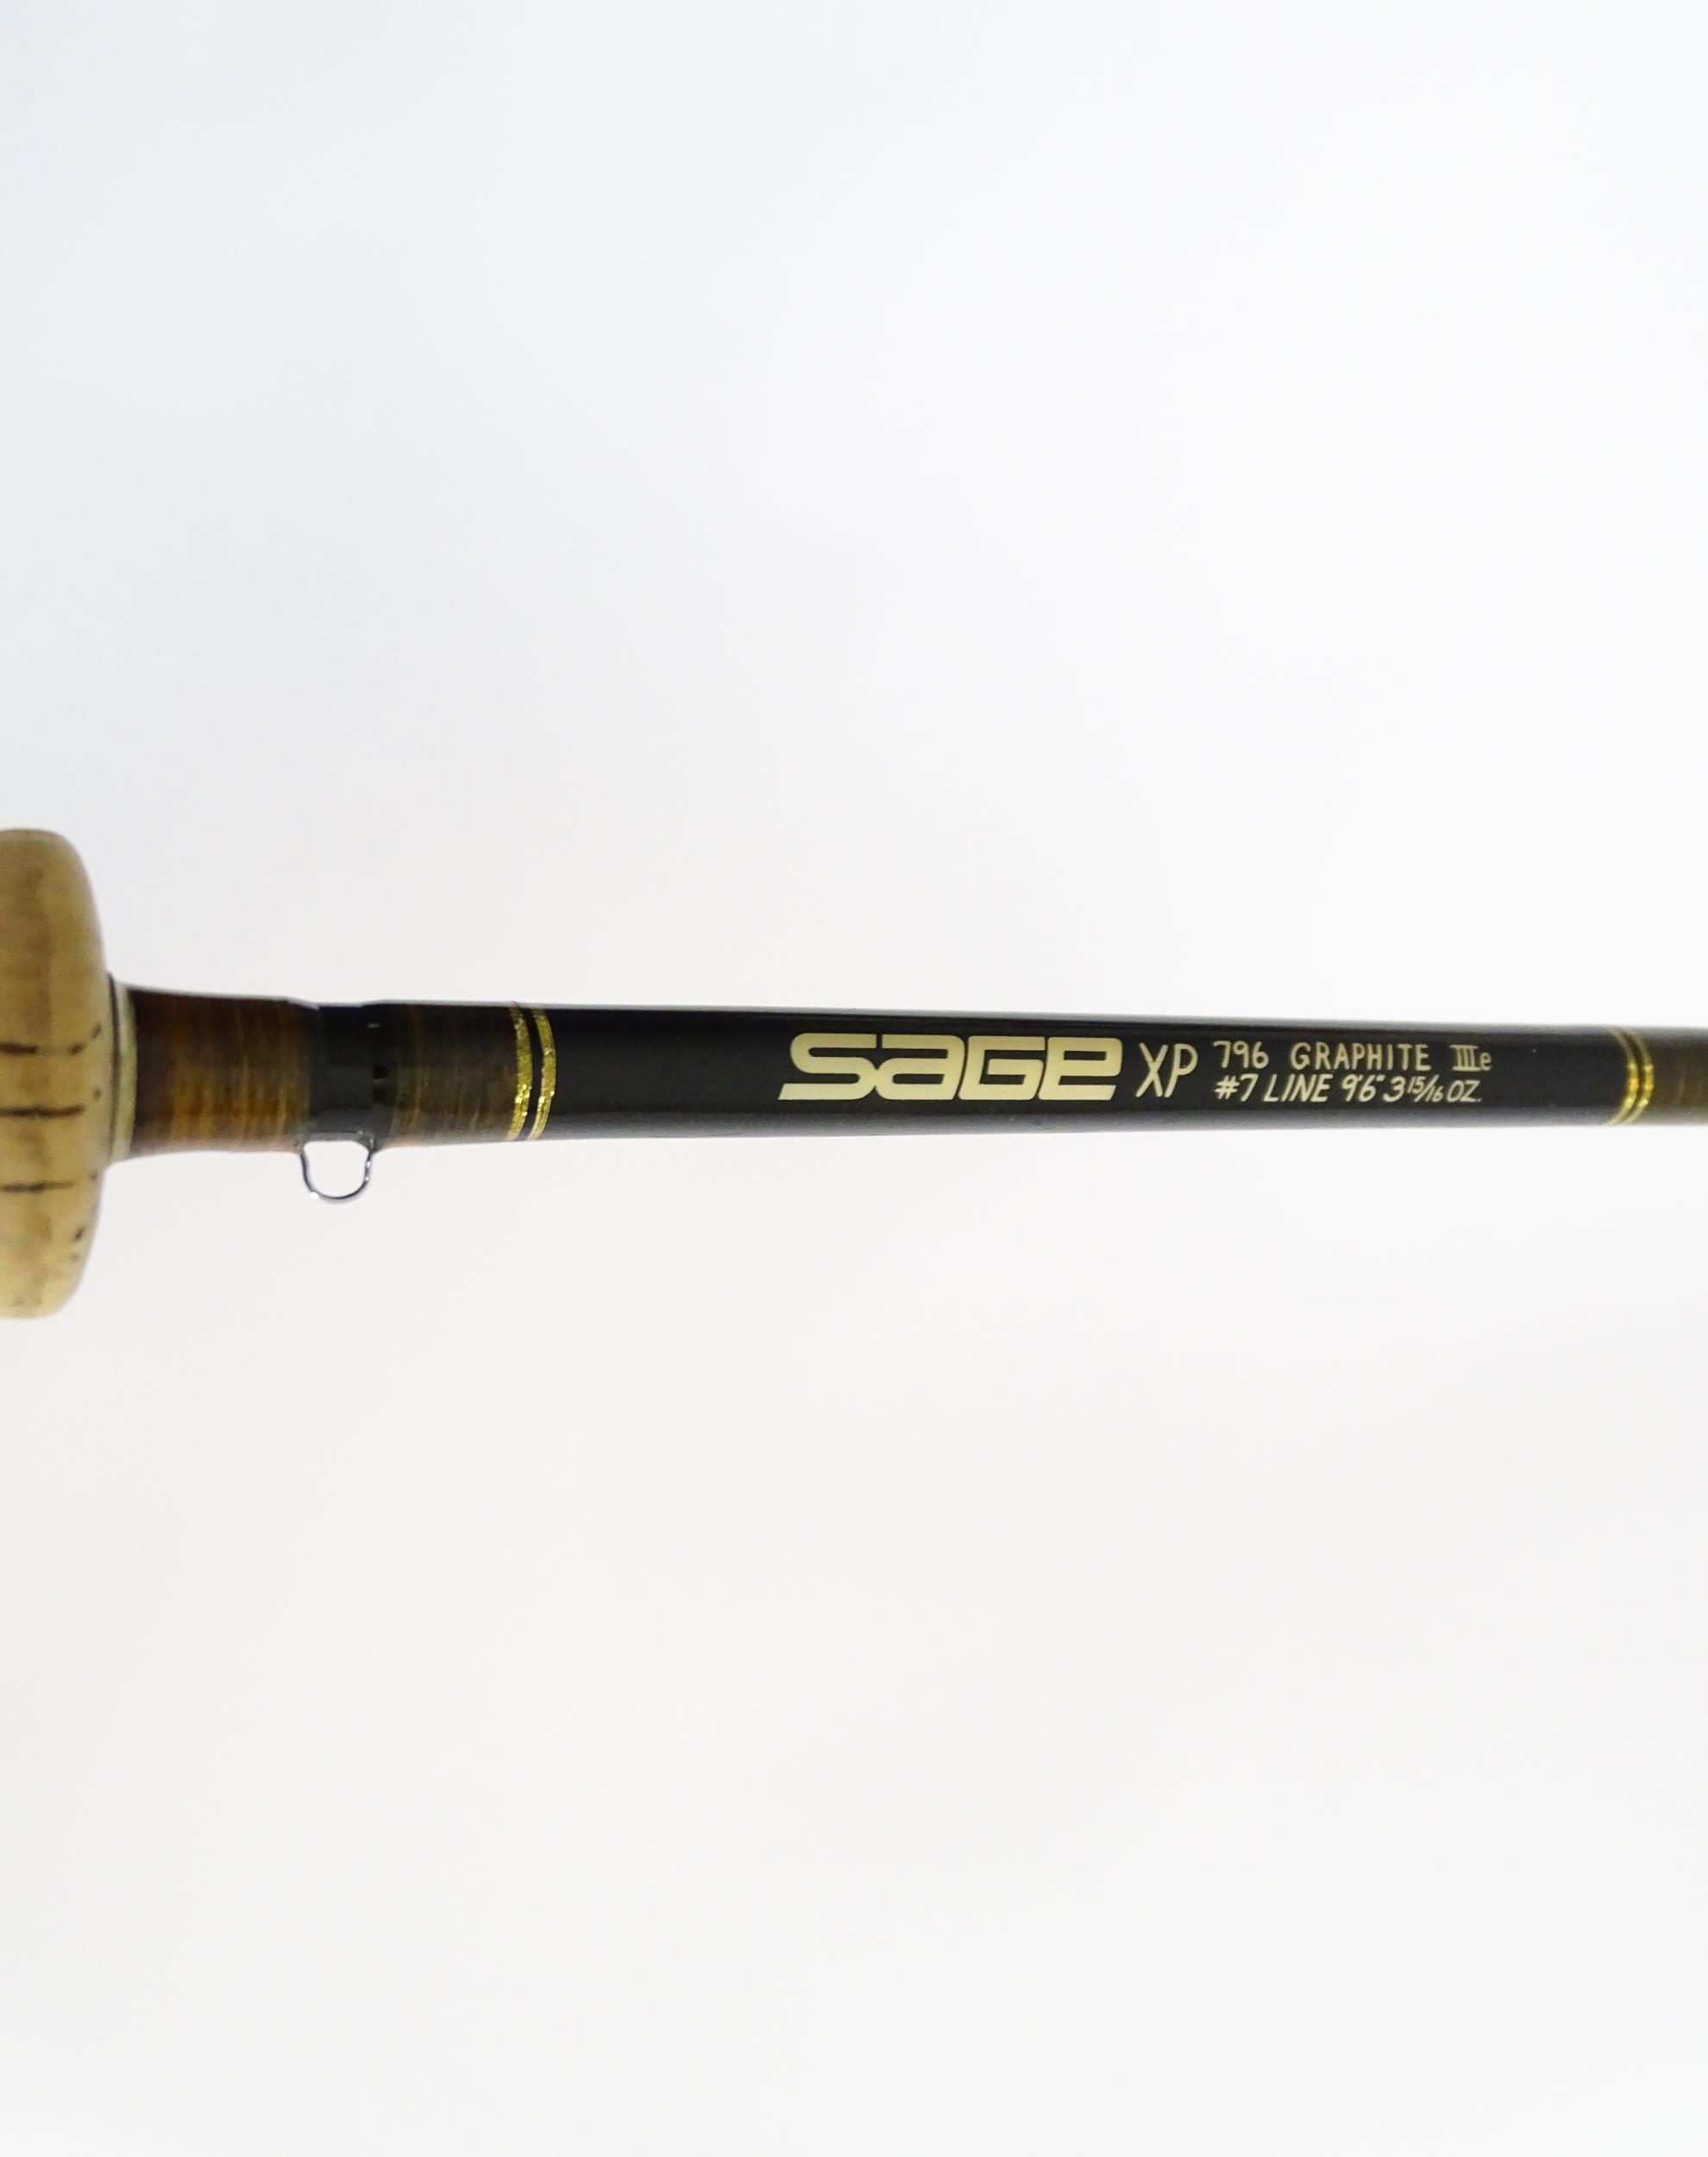 Fishing : a Sage (USA) 'XP 796 Graphite IIIe' two-piece fly rod, approx 114" long. With cloth case - Image 4 of 7